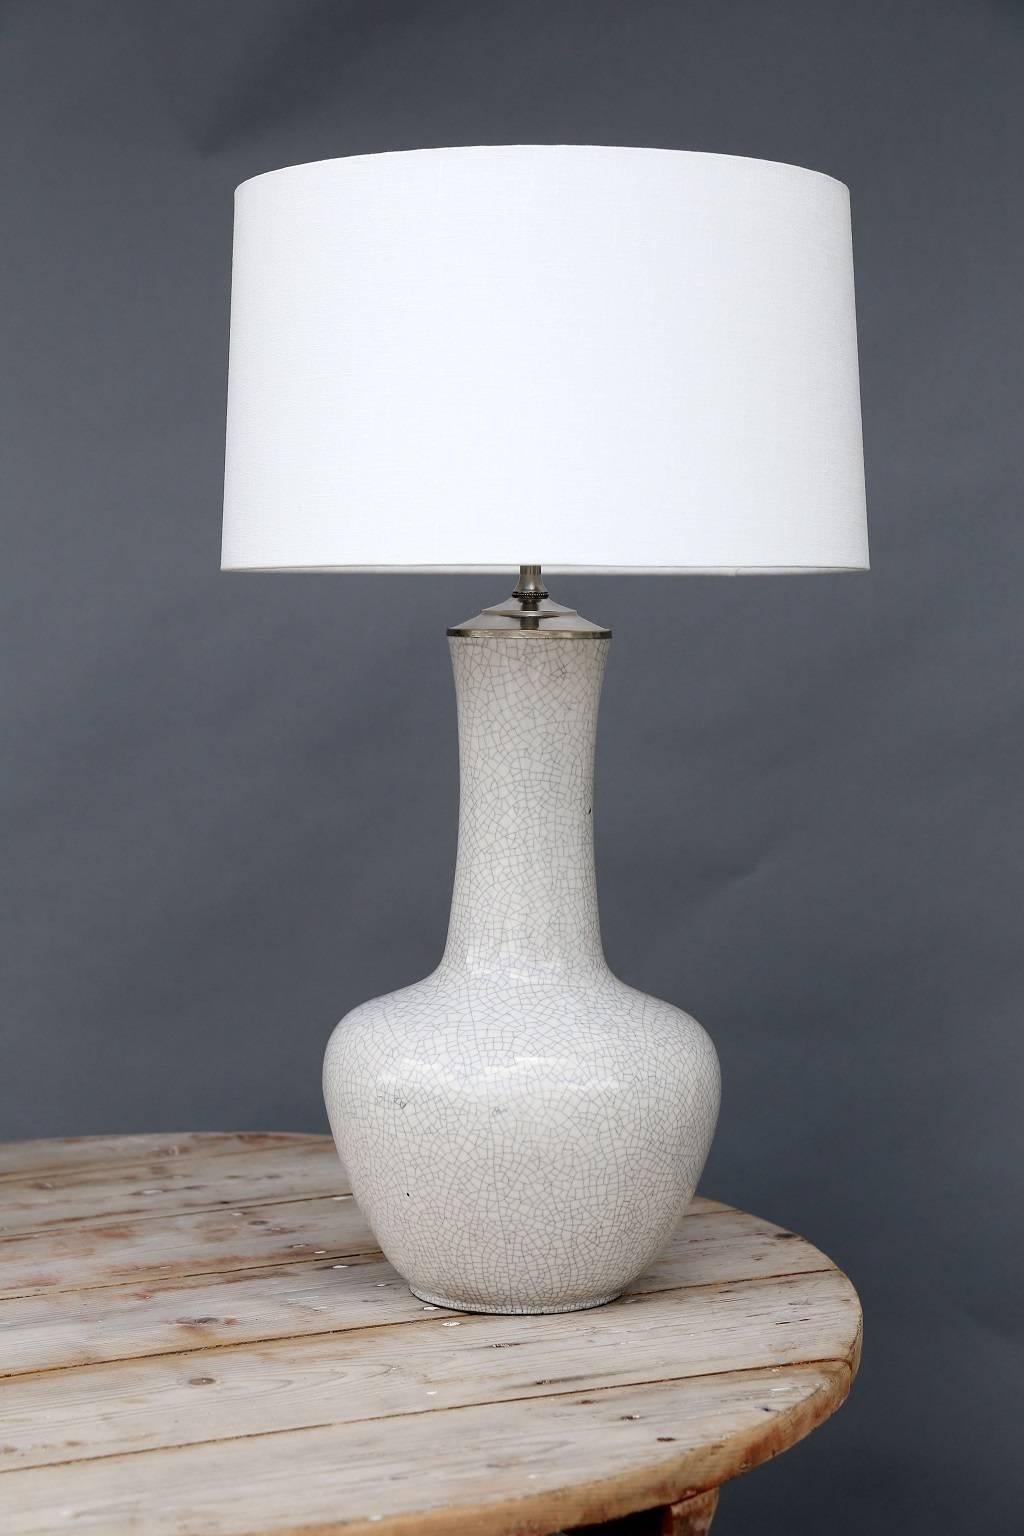 Vintage crackle glaze white vase, newly wired as custom table lamp with rolled-edge linen shade.